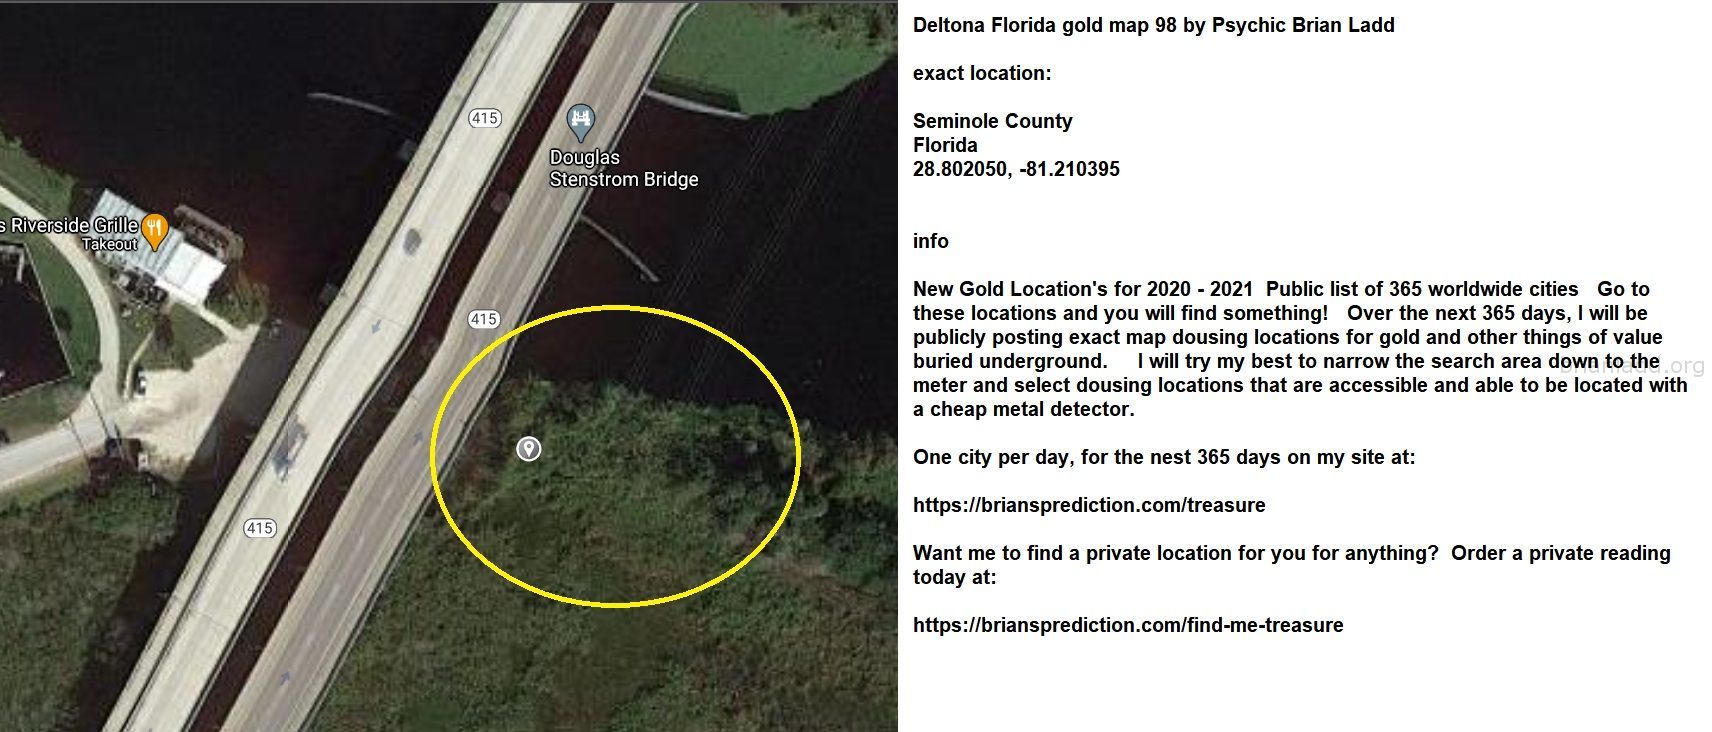 Deltona Florida gold map 98 by Psychic Brian Ladd
New Gold Location's for 2020 - 2021  Public list of 365 worldwide cities   Go to these locations and you will find something!   Over the next 365 days, I will be publicly posting exact map dousing locations for gold and other things of value buried underground.     I will try my best to narrow the search area down to the meter and select dousing locations that are accessible and able to be located with a cheap metal detector. One city per day, for the nest 365 days on my site at:  https://briansprediction.com/treasure  Want me to find a private location for you for anything?  Order a private reading today at:  https://briansprediction.com/find-me-treasure
